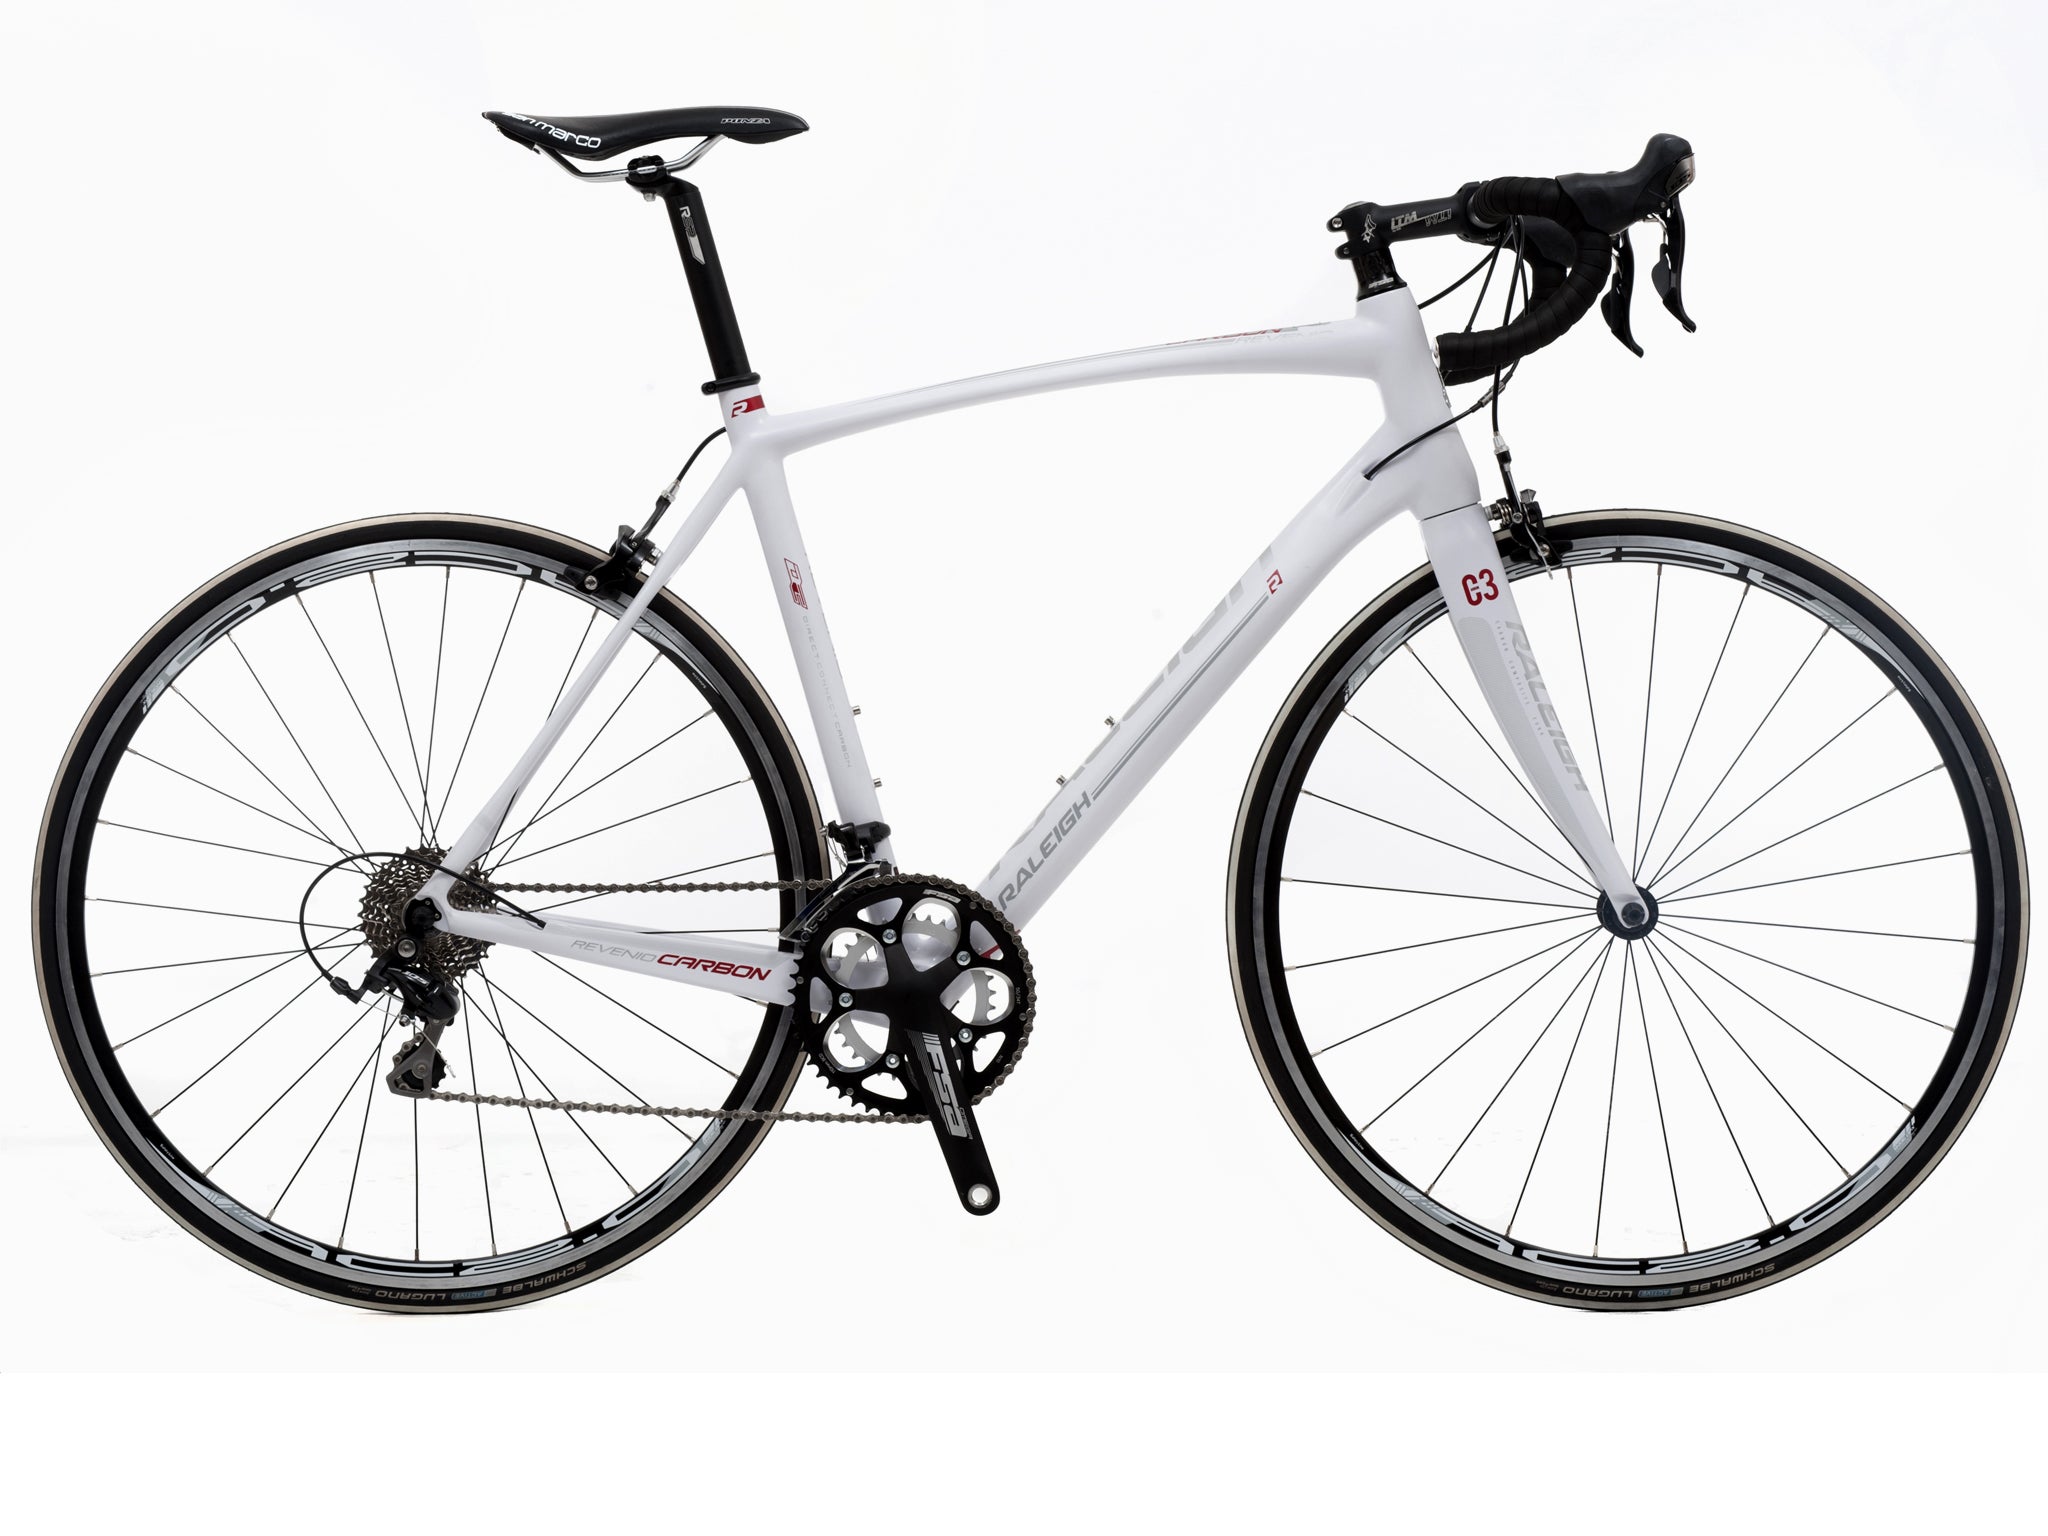 The new Revenio Carbon racer from Raleigh